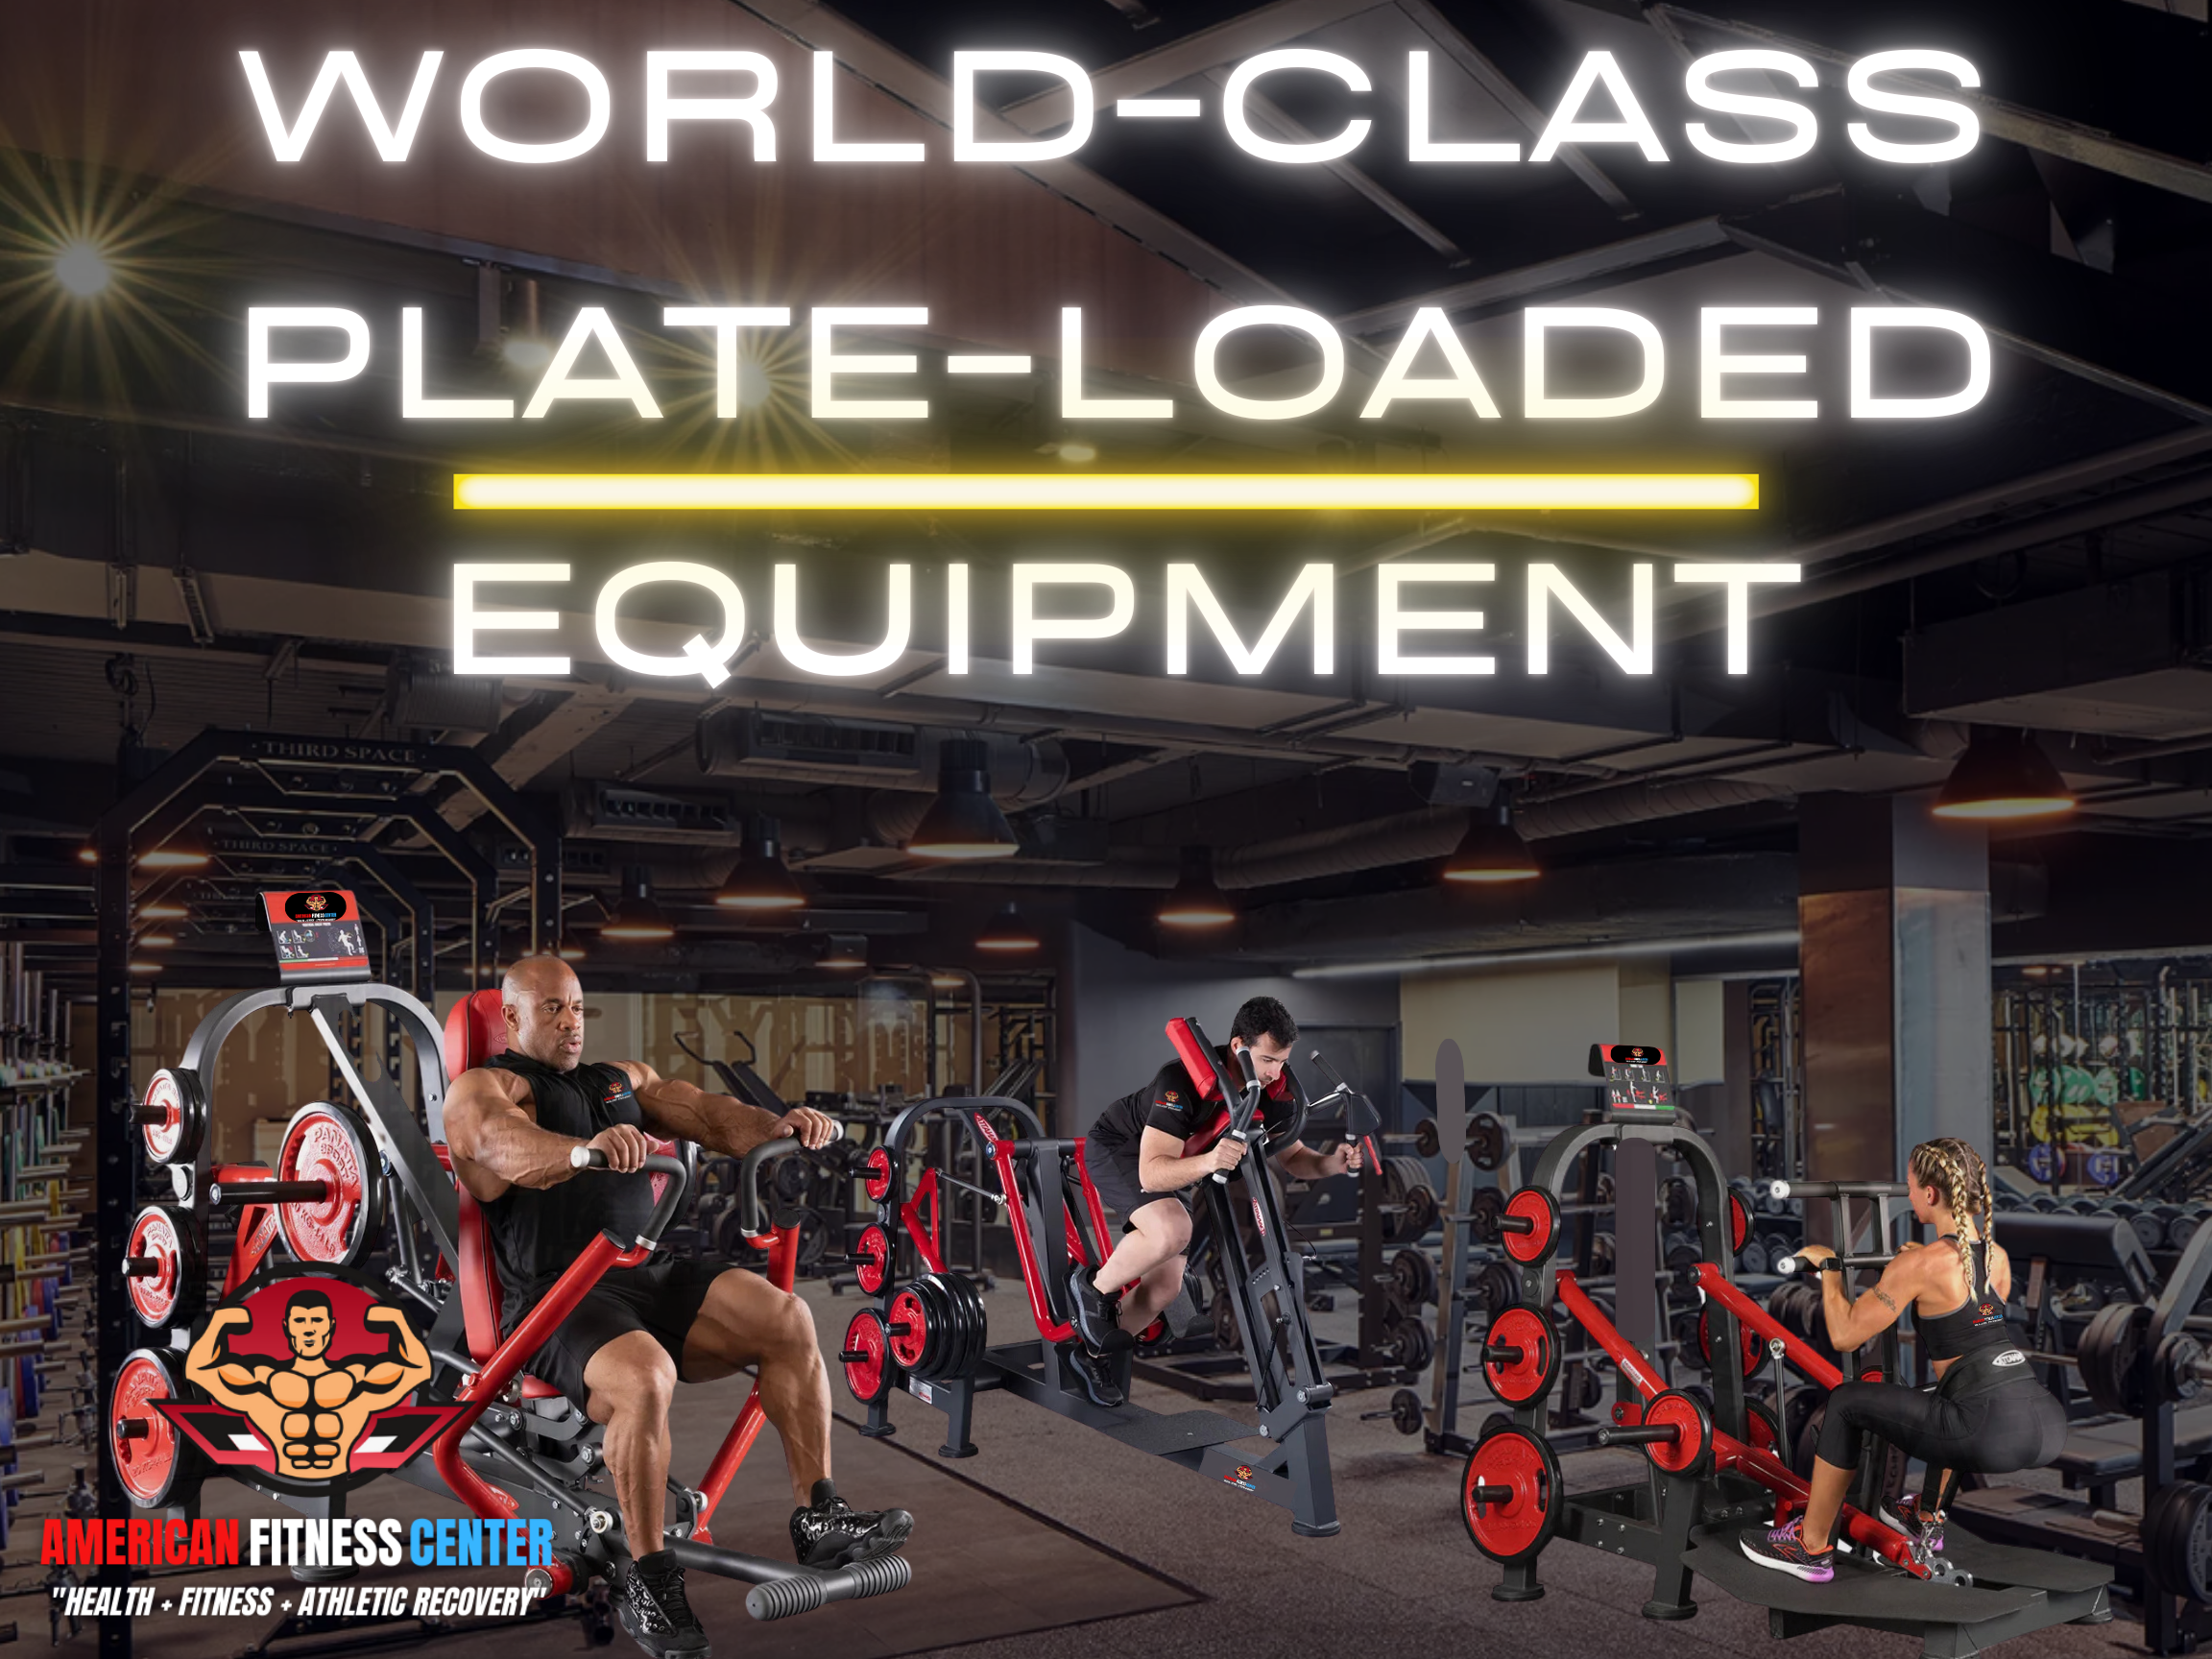 World-Class-Strength-Equipment-Near-Me-in-Roswell-GA-Luxury 24 Hour Gym- American-Fitness-Center-West-Roswell